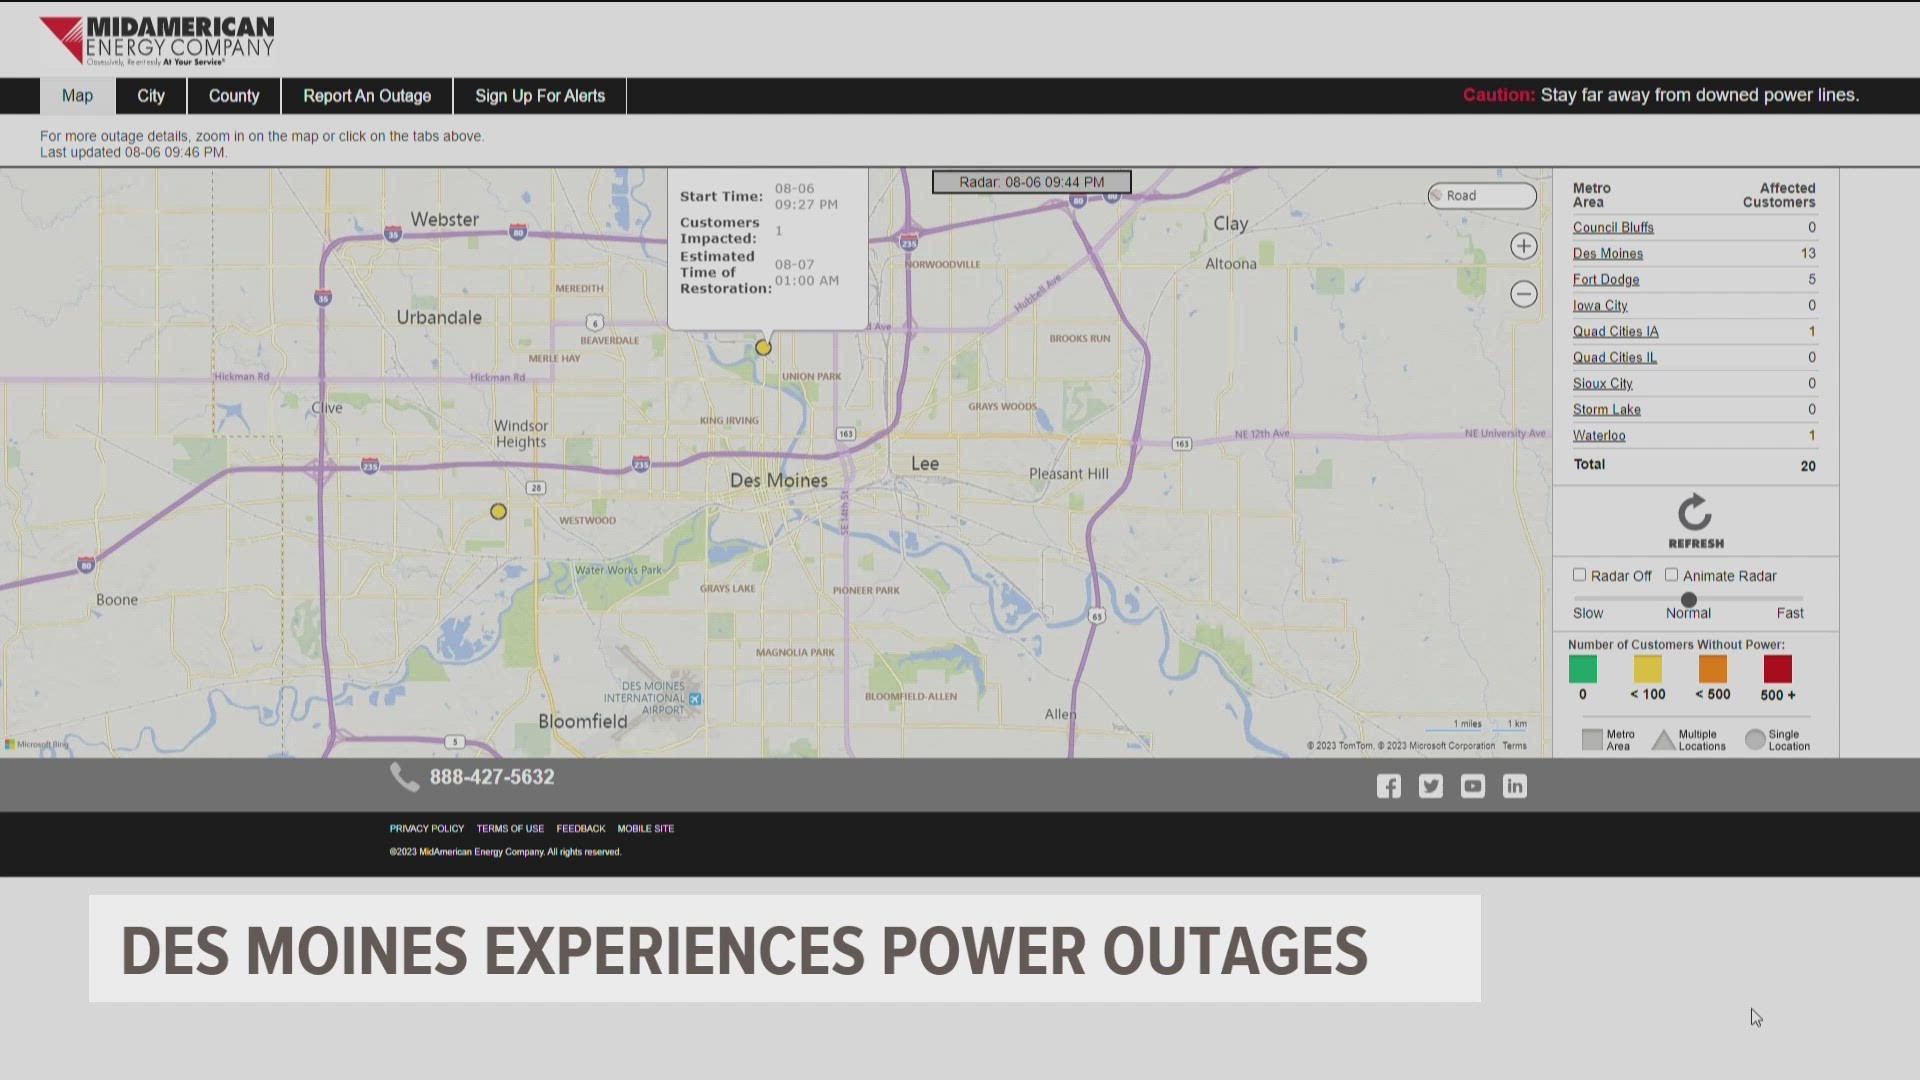 A spokesperson for MidAmerican said the outage was caused by a tree on a power line.